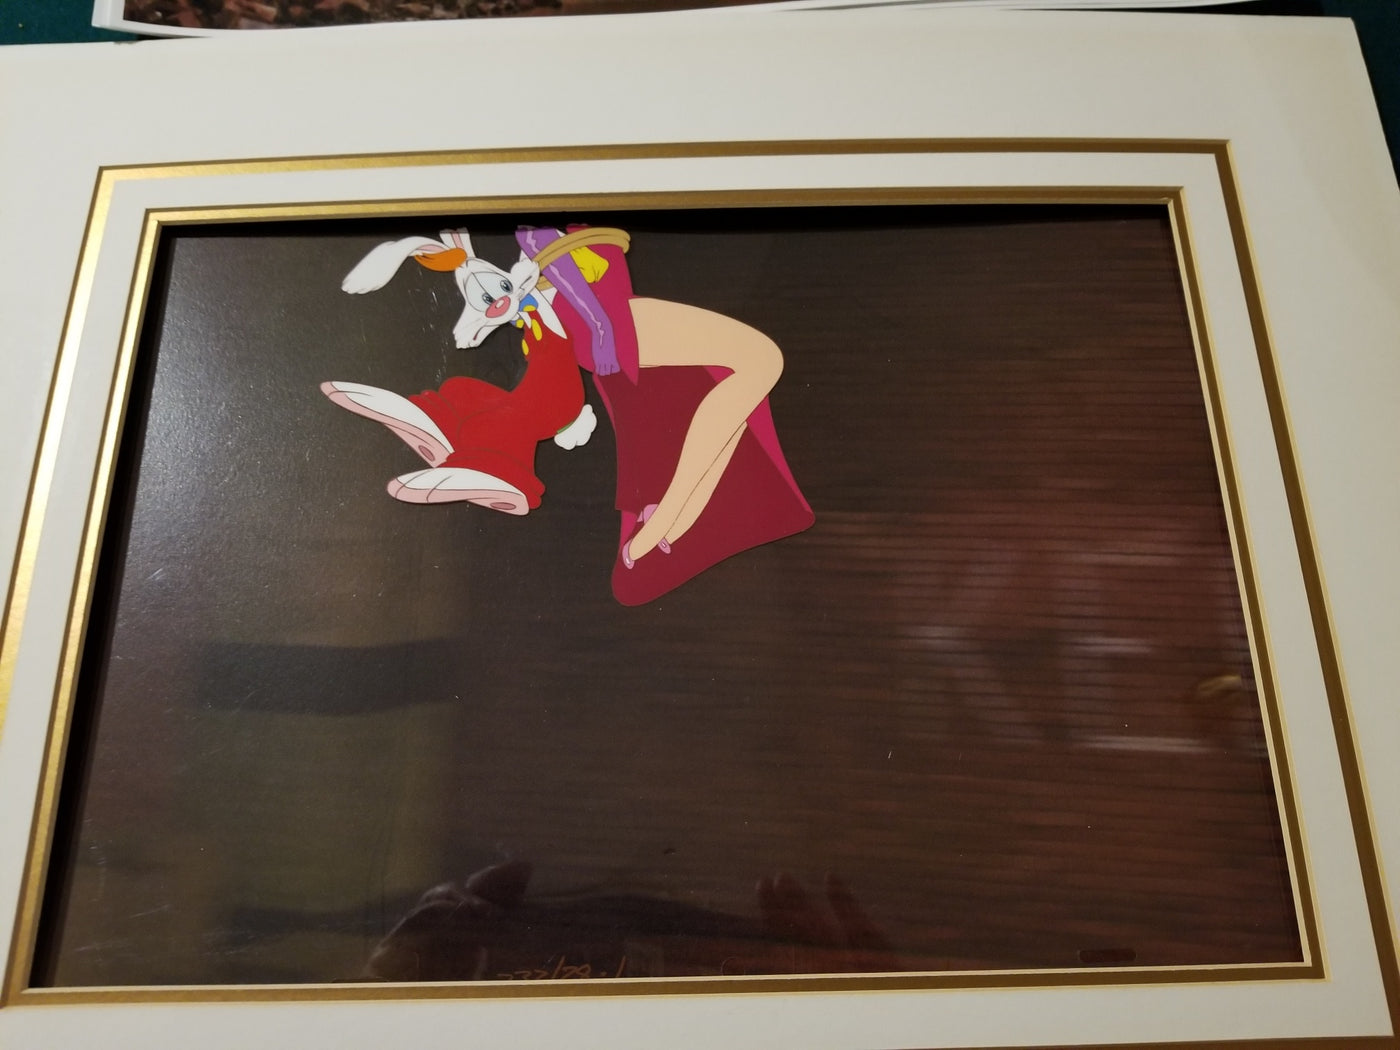 Original Walt Disney Production Cel from Who Framed Roger Rabbit featuring Roger Rabbit and Jessica Rabbit